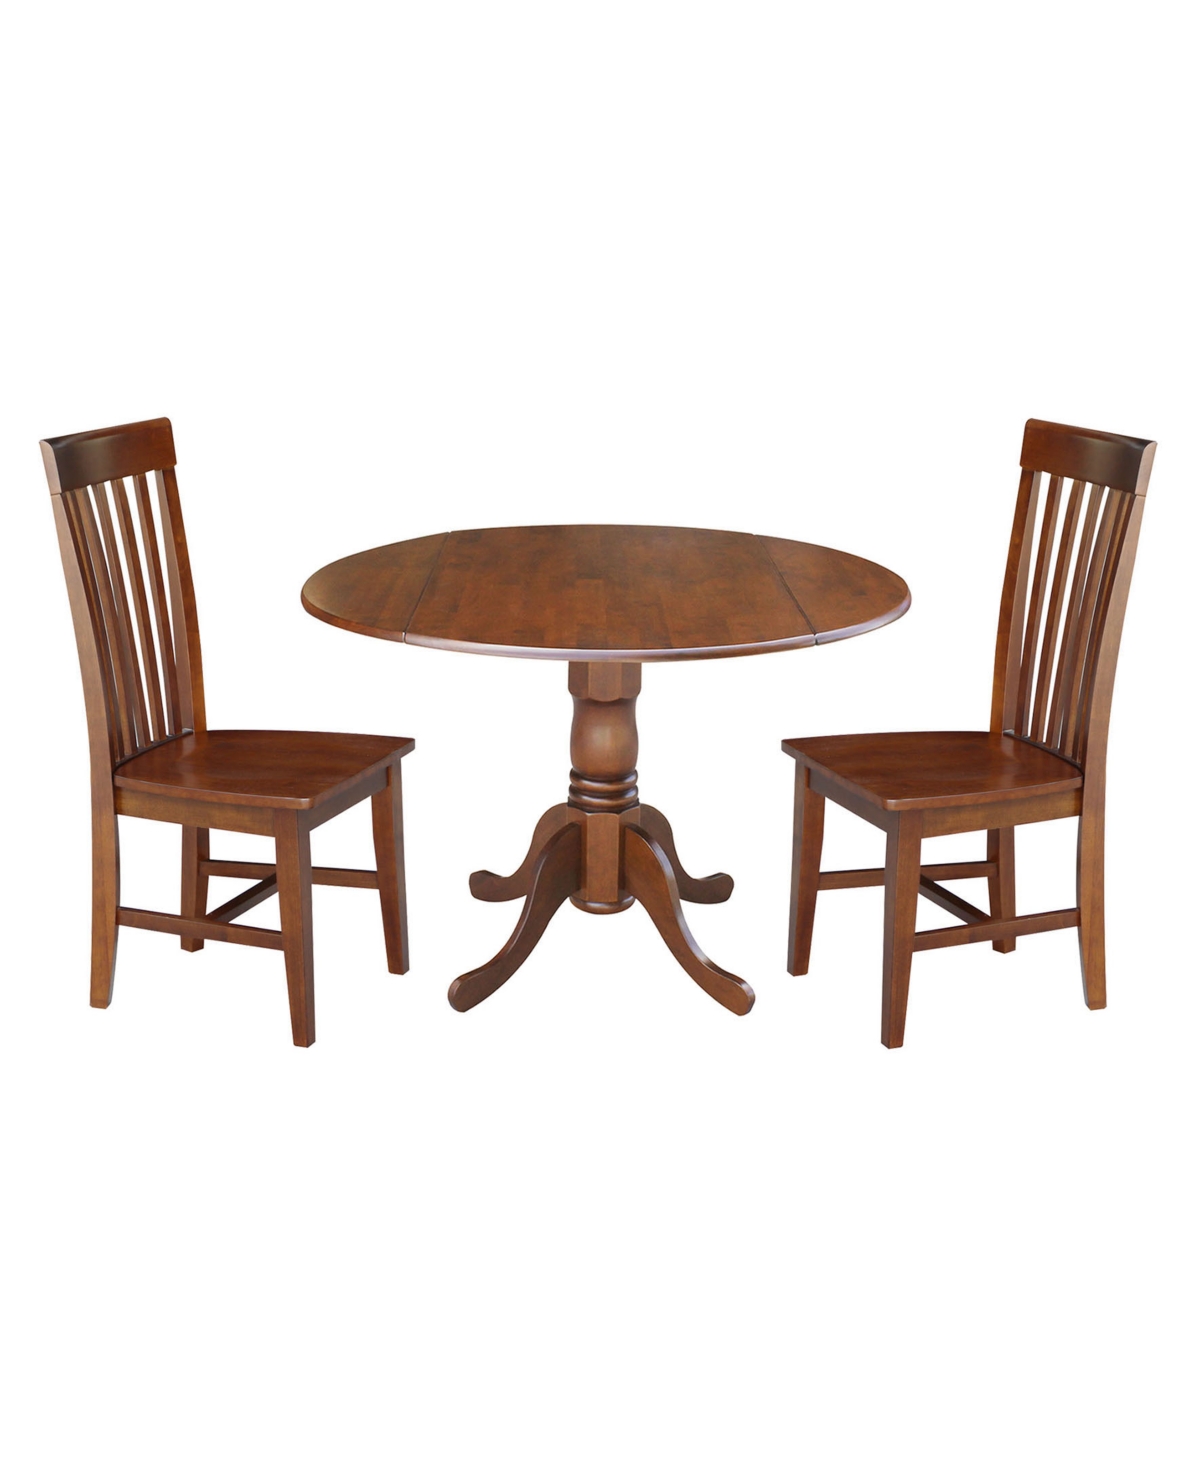 Shop International Concepts 42" Dual Drop Leaf Table With 2 Slat Back Dining Chairs In Espresso